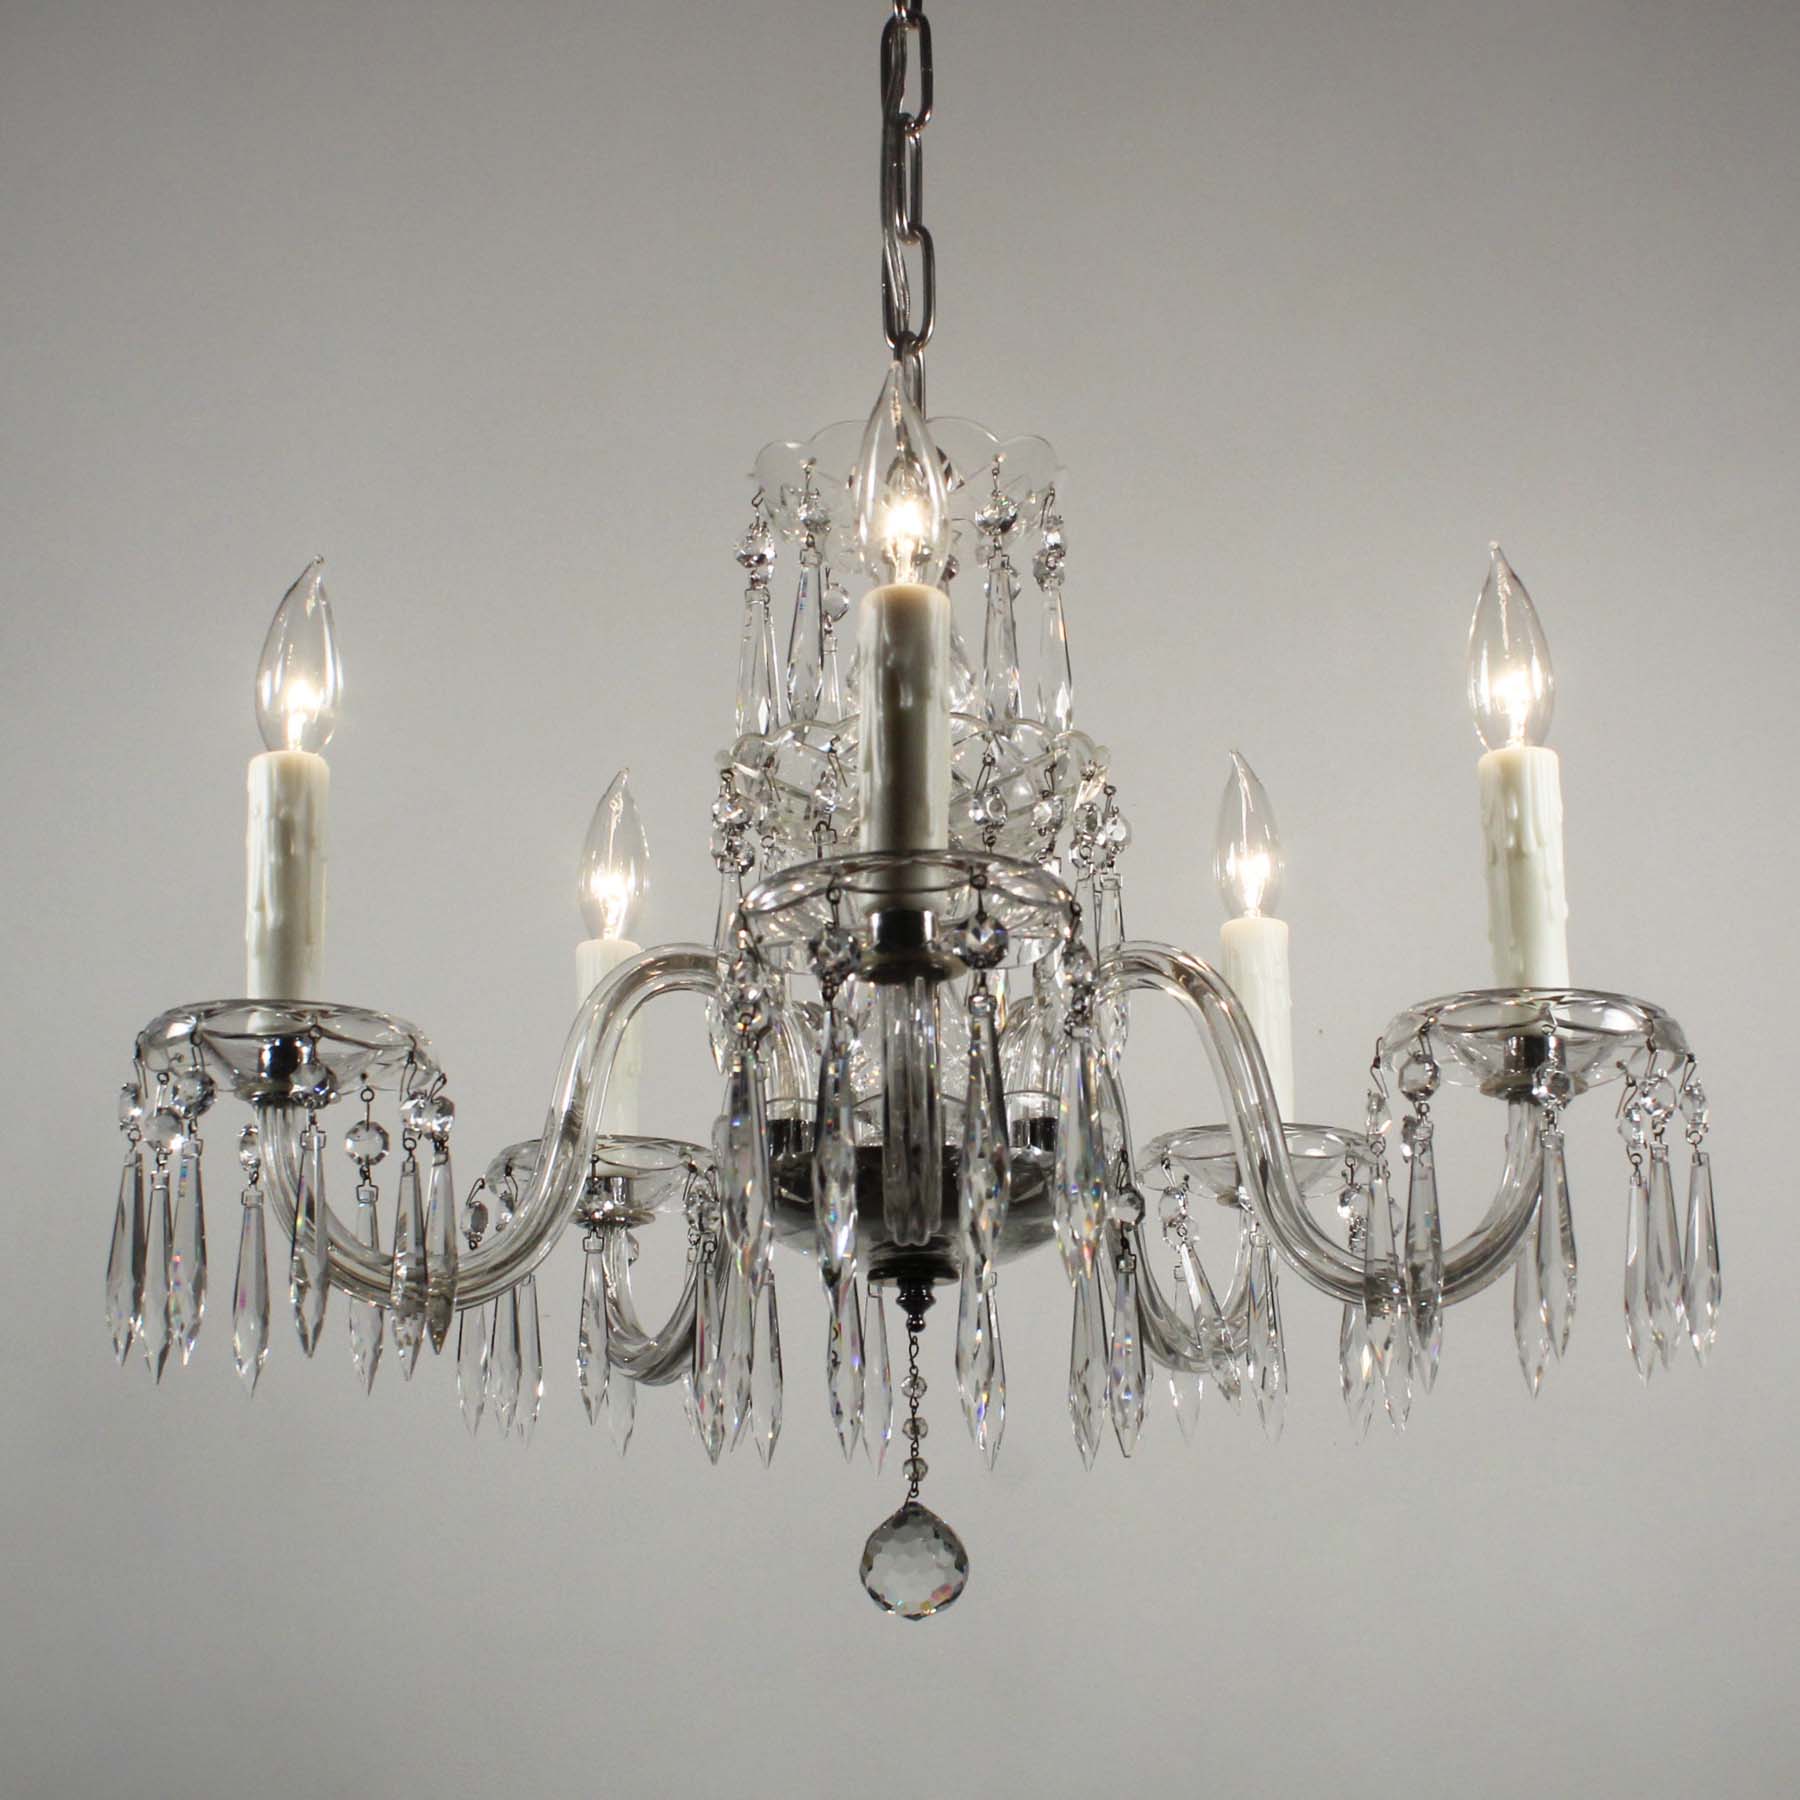 SOLD Five-Light Glass Chandelier with Prisms, Antique Lighting-67739